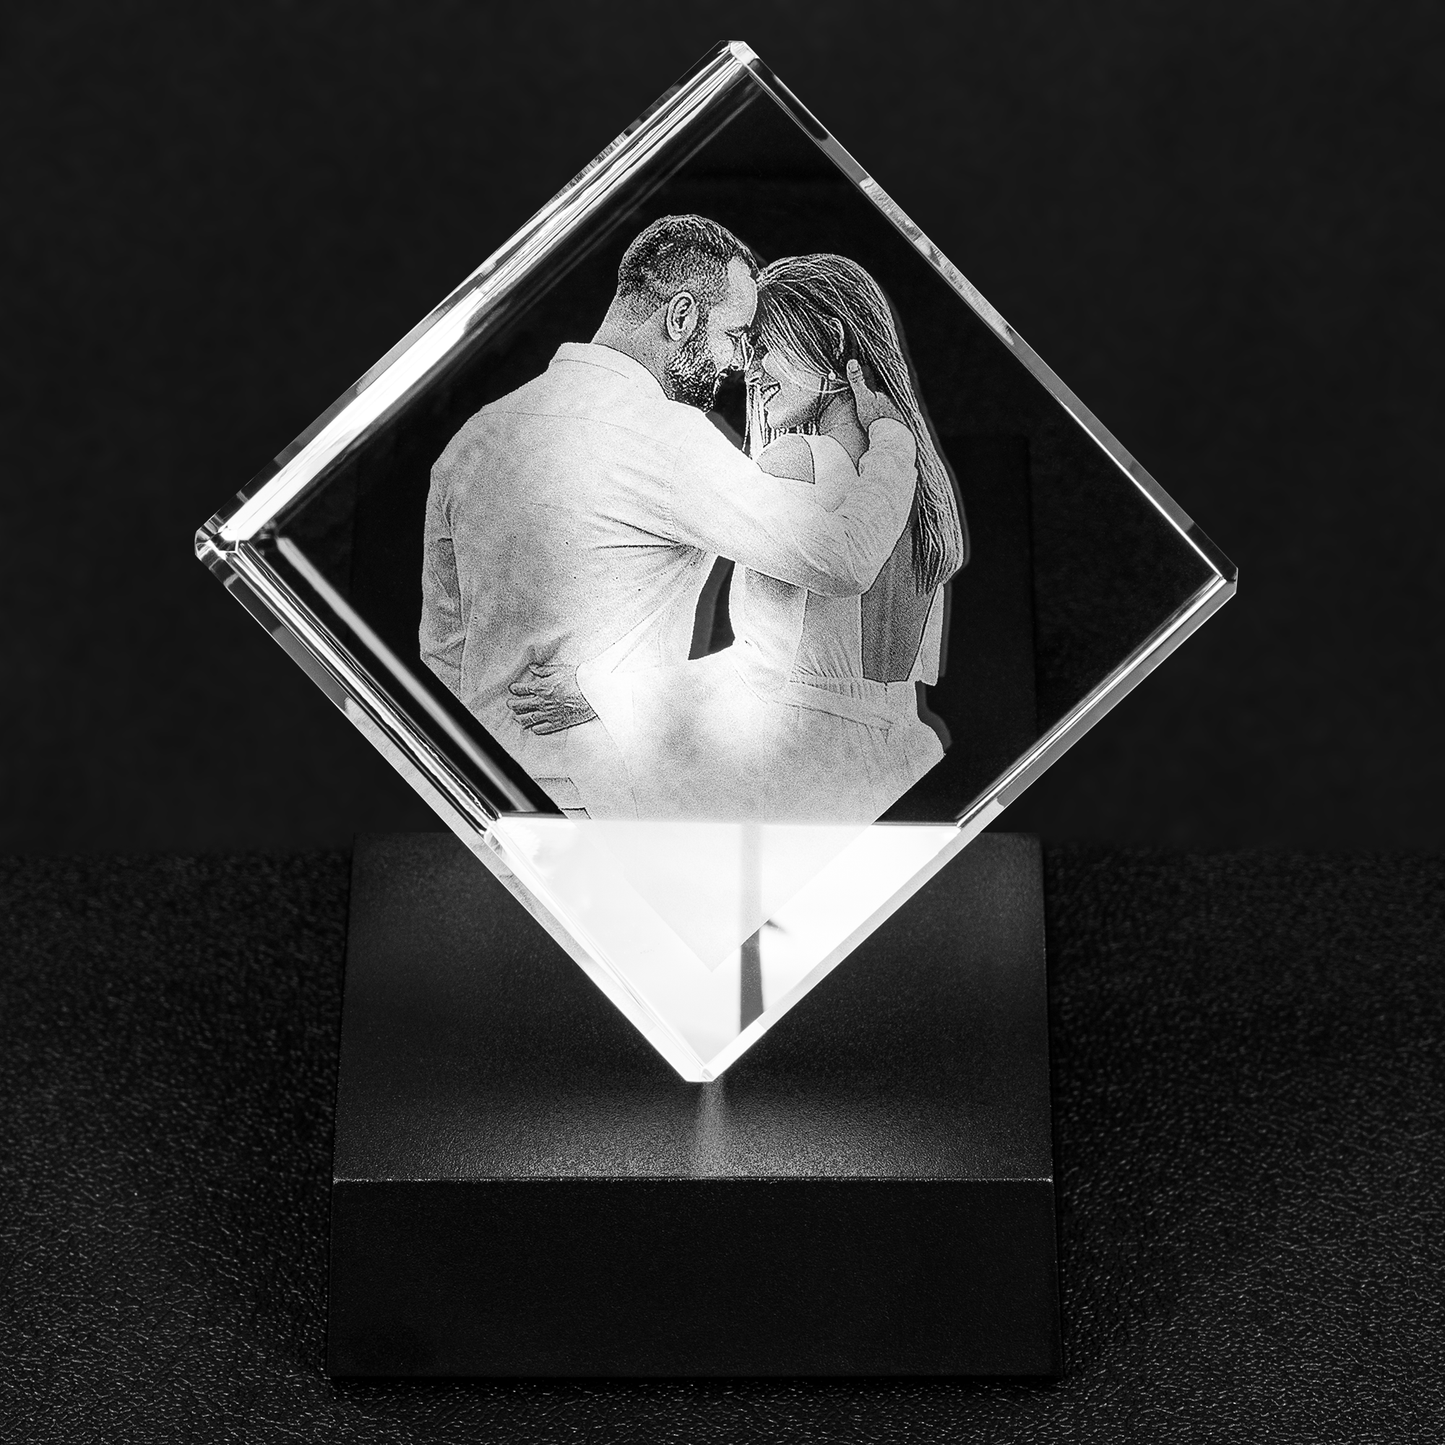 Personalized Crystal Decoration. Gift for Weddings, Anniversaries, Birthdays, Graduation, Other Special Occasion